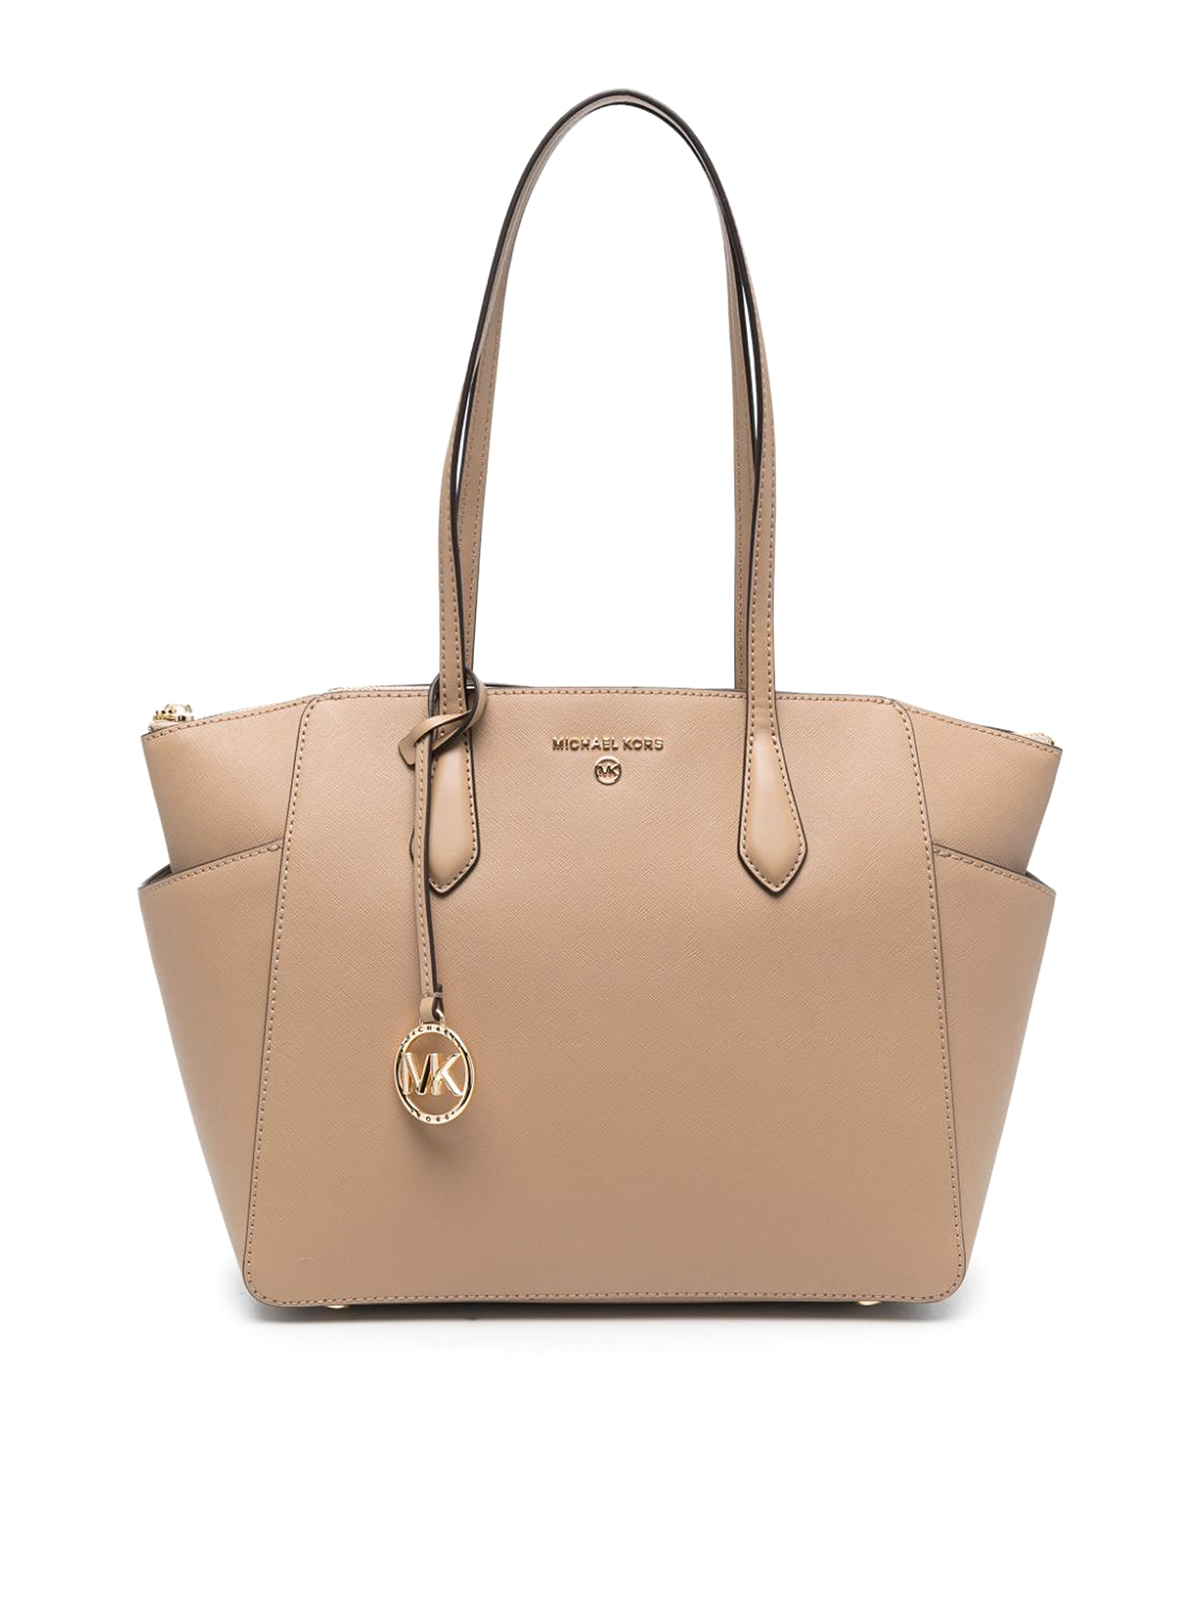 Michael Kors Outlet: tote bags for women - Brown  Michael Kors tote bags  30S2G6AT2L online at